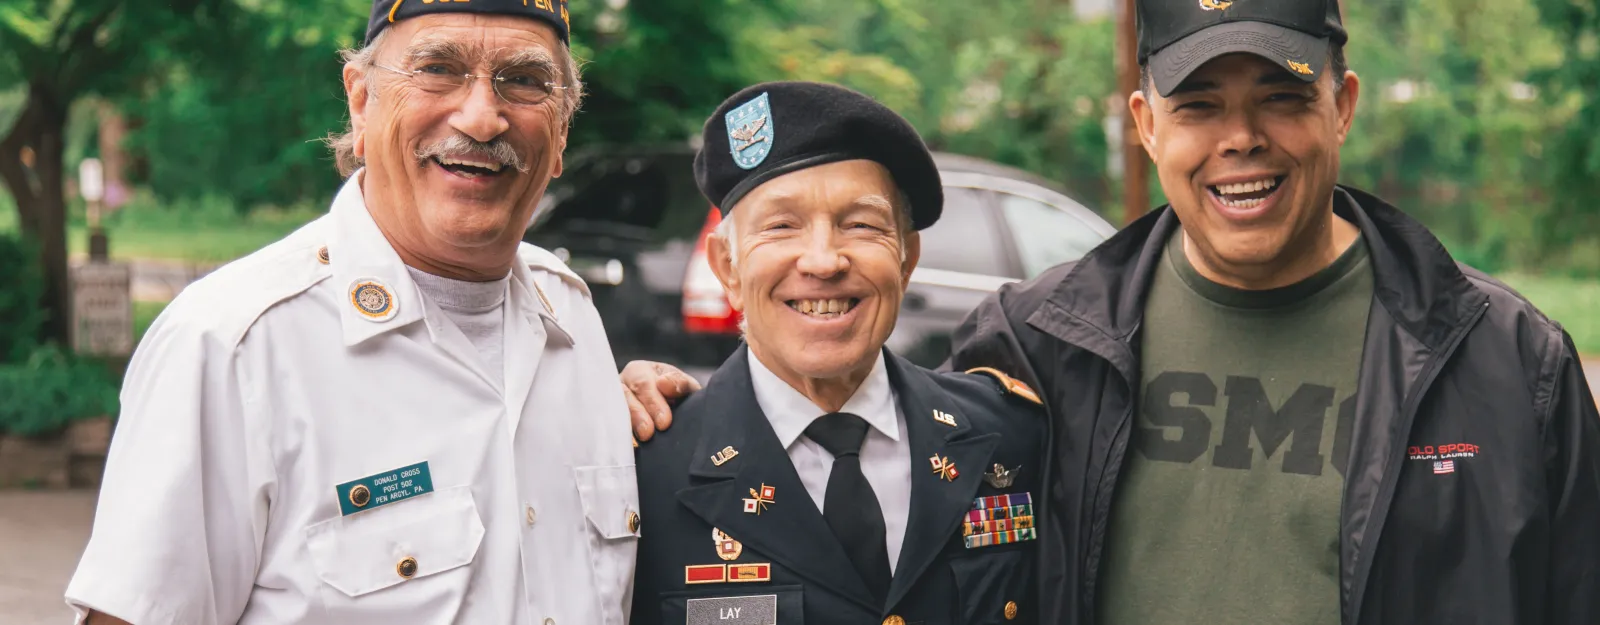 From colonel to case worker: Serving veterans